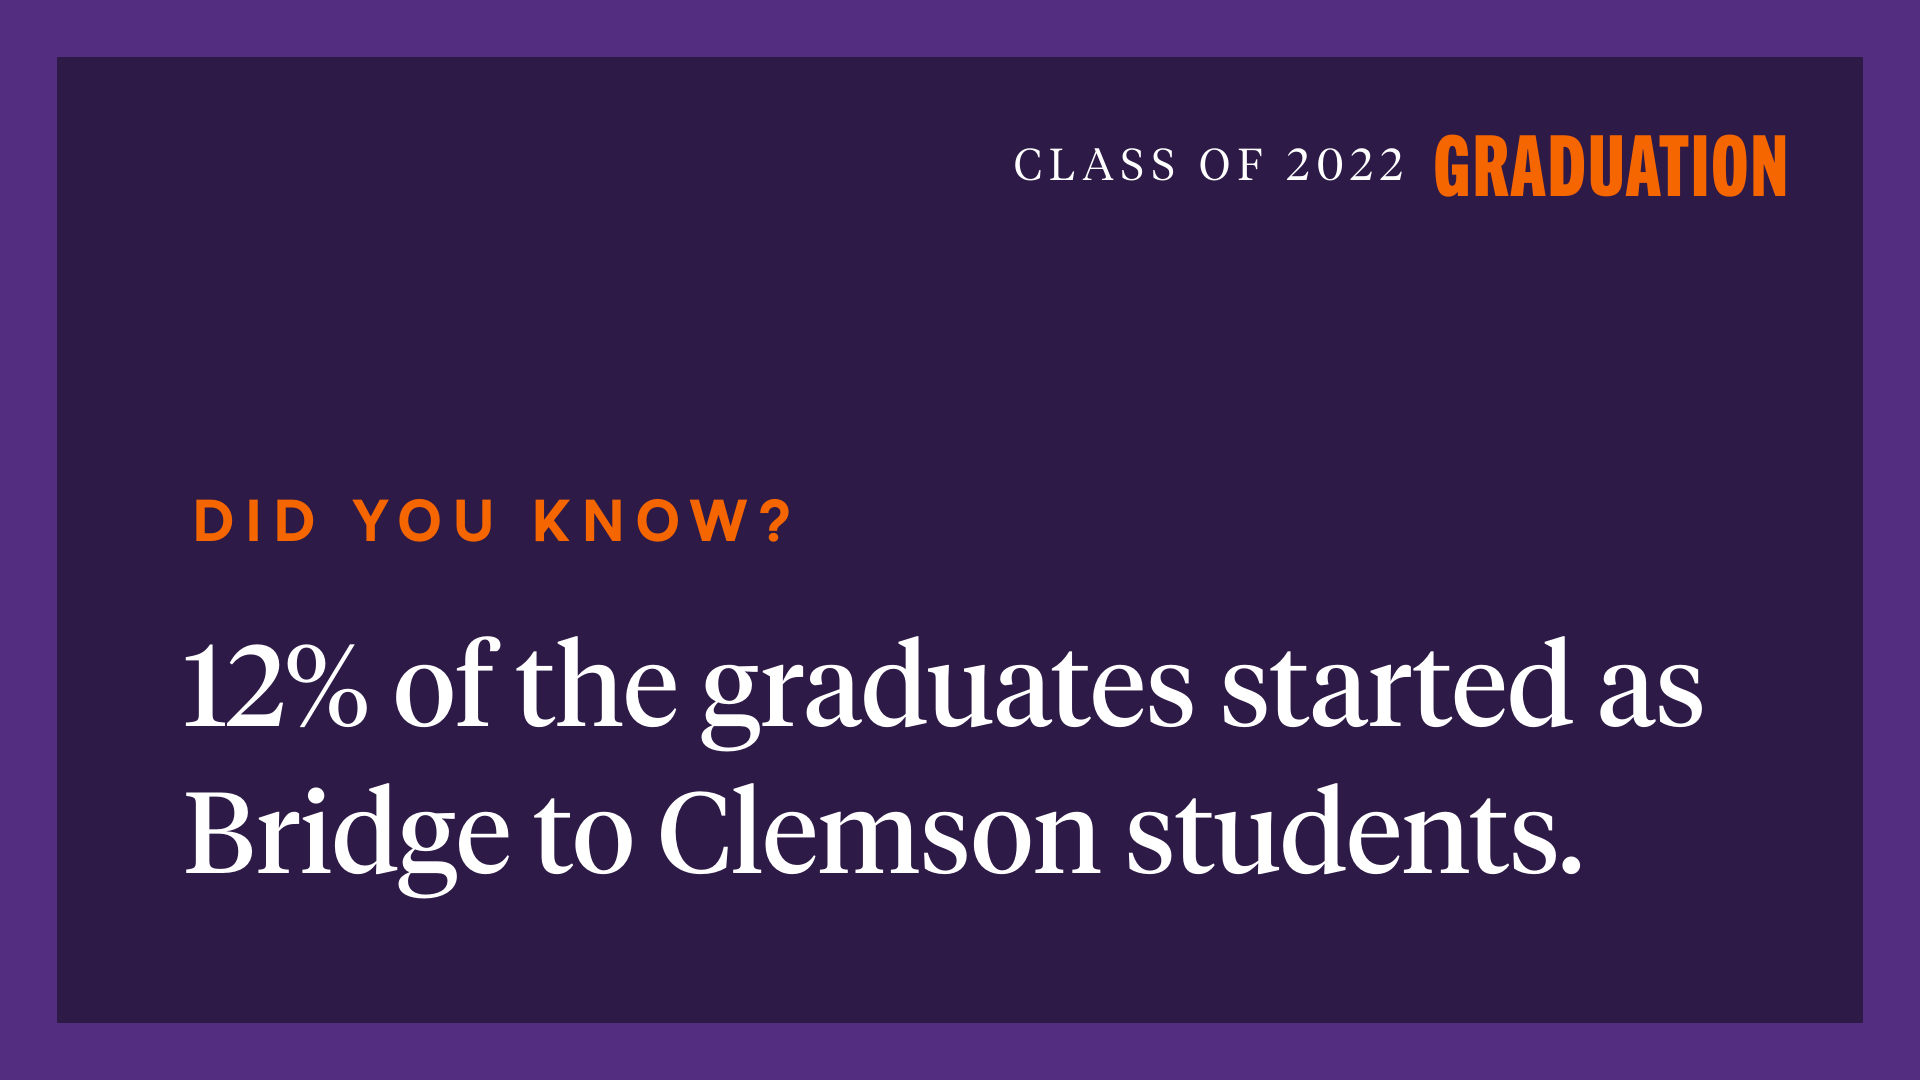 Class of 2022 Graduation: Did you know? 12 percent of the graduates started as Bridge to Clemson students.